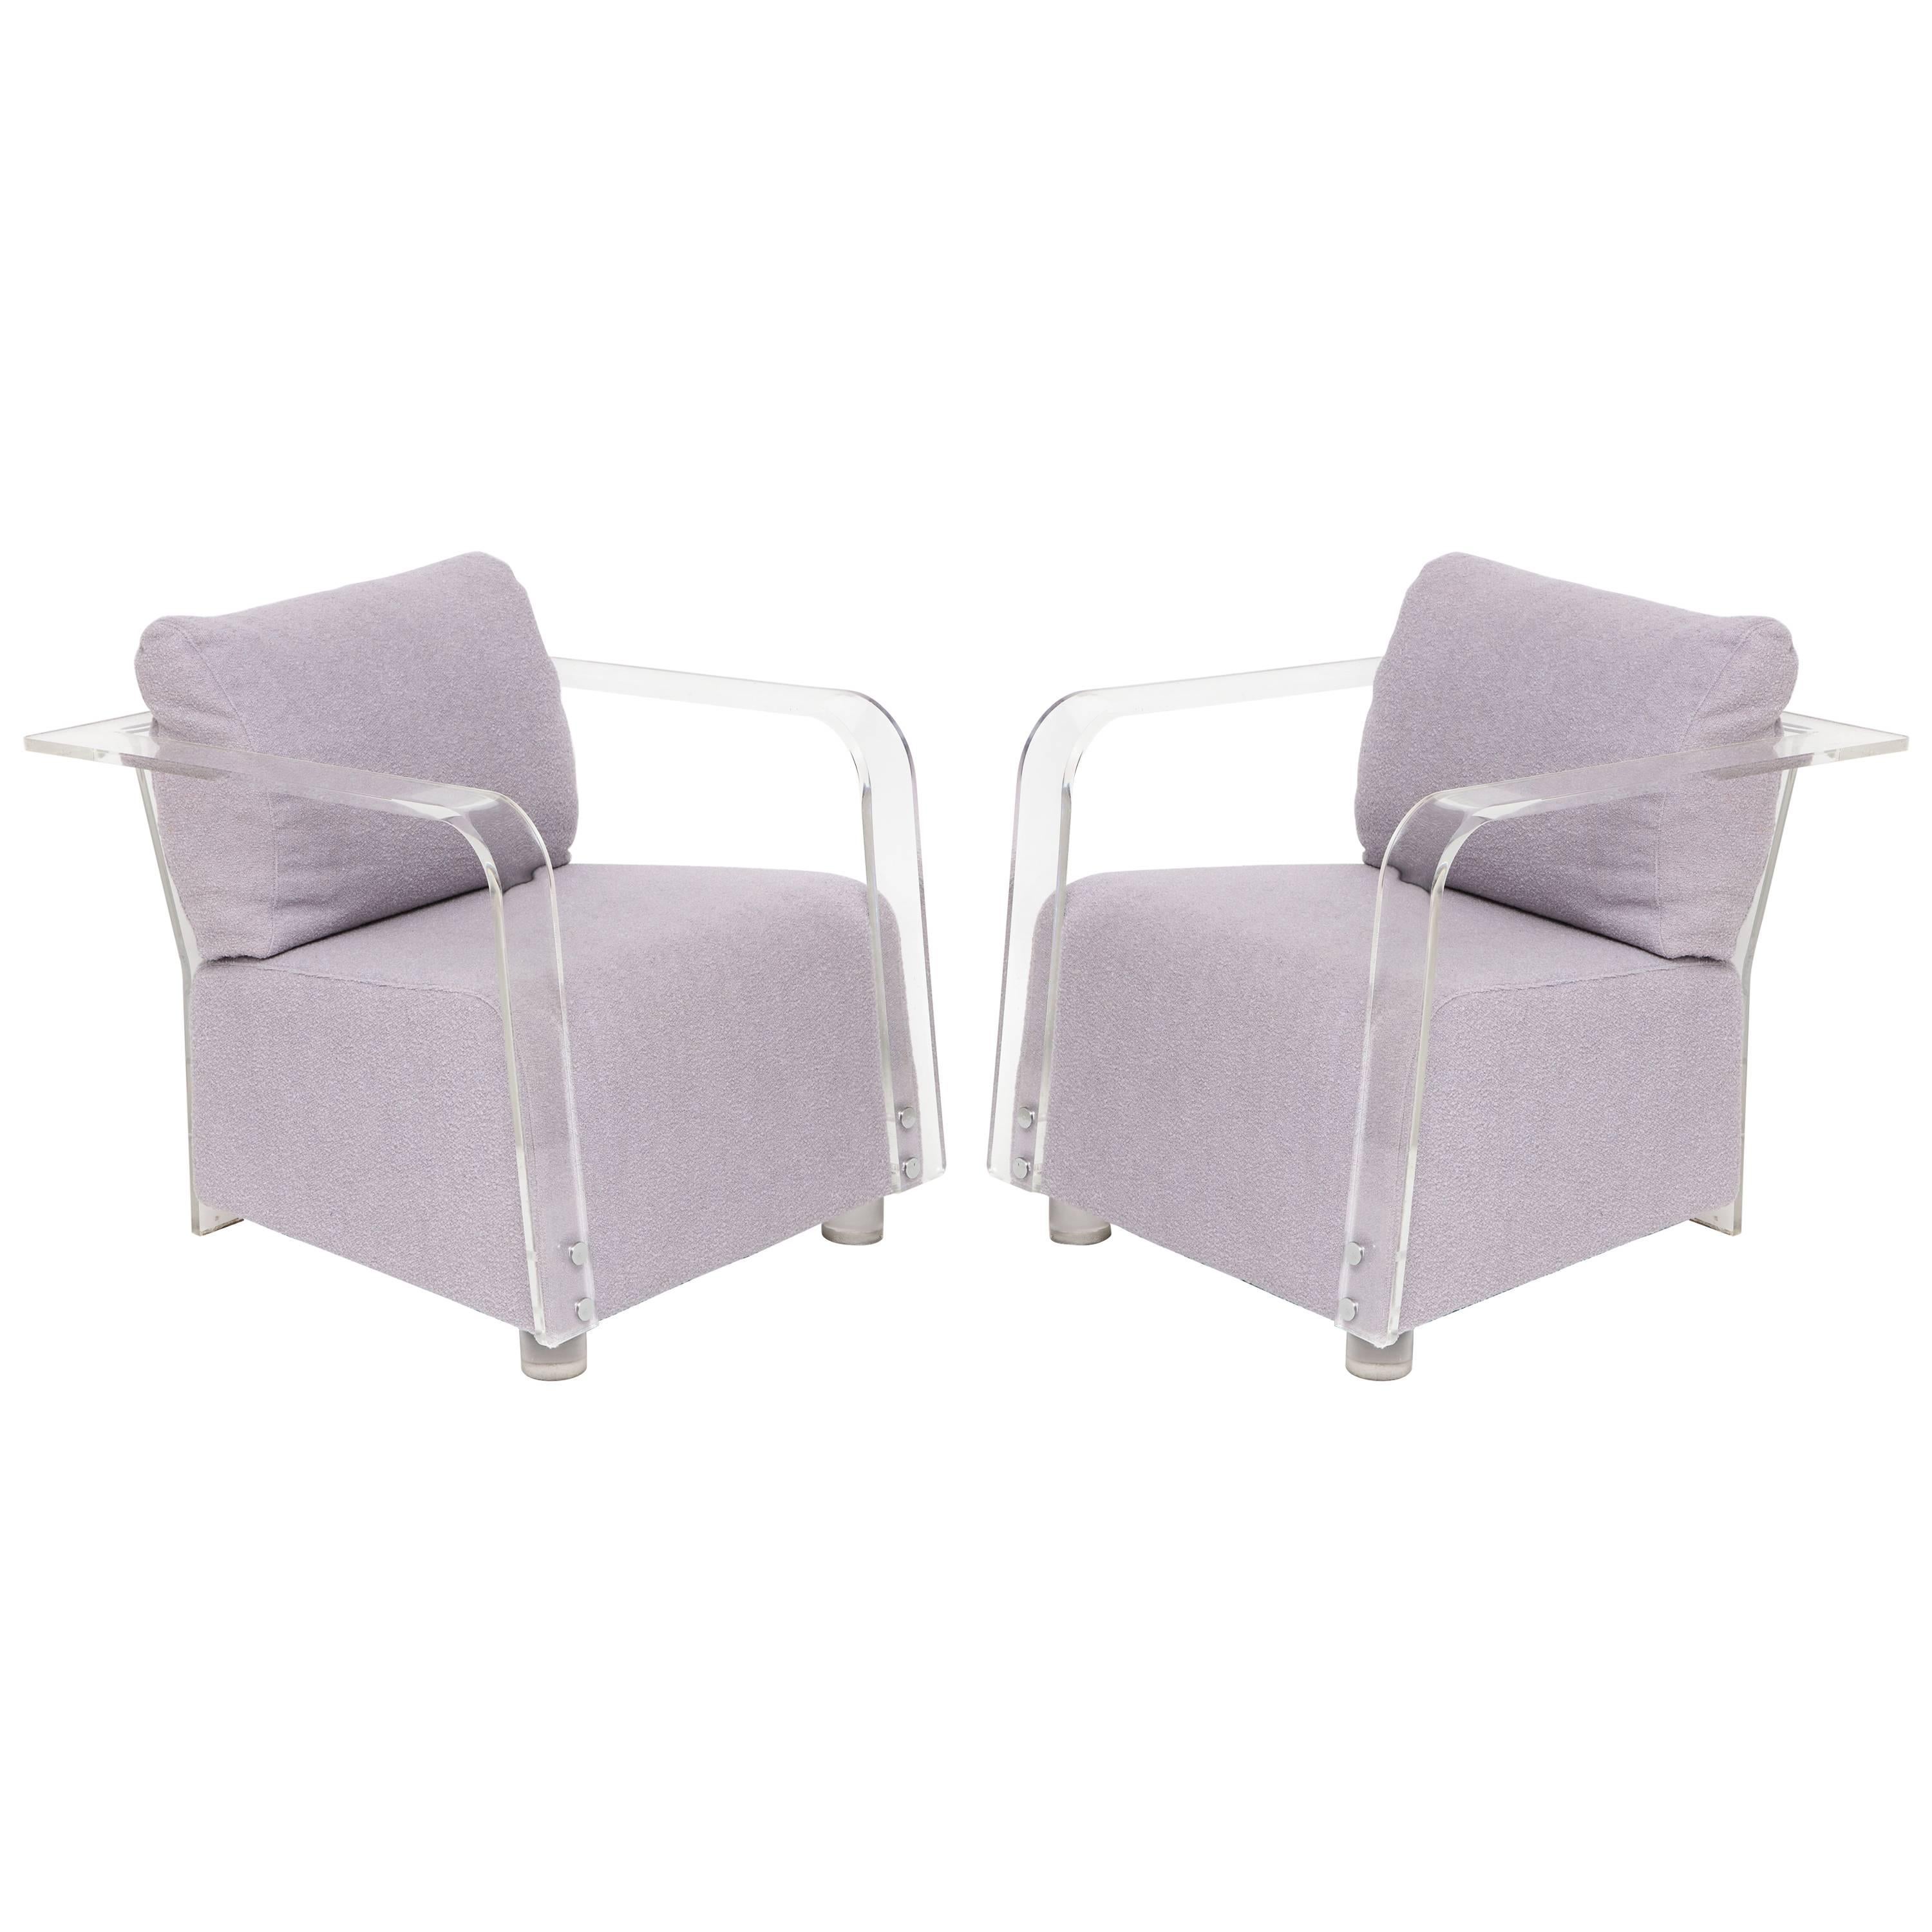 Lucite and lavender boucle pair of lounge chairs with chrome detailing, 1970s, France.

Lovely pair of 1970s Lucite French lounge chairs newly upholstered in lovely lavender wool boucle. The Lucite is in good overall condition.
Chic. Chrome